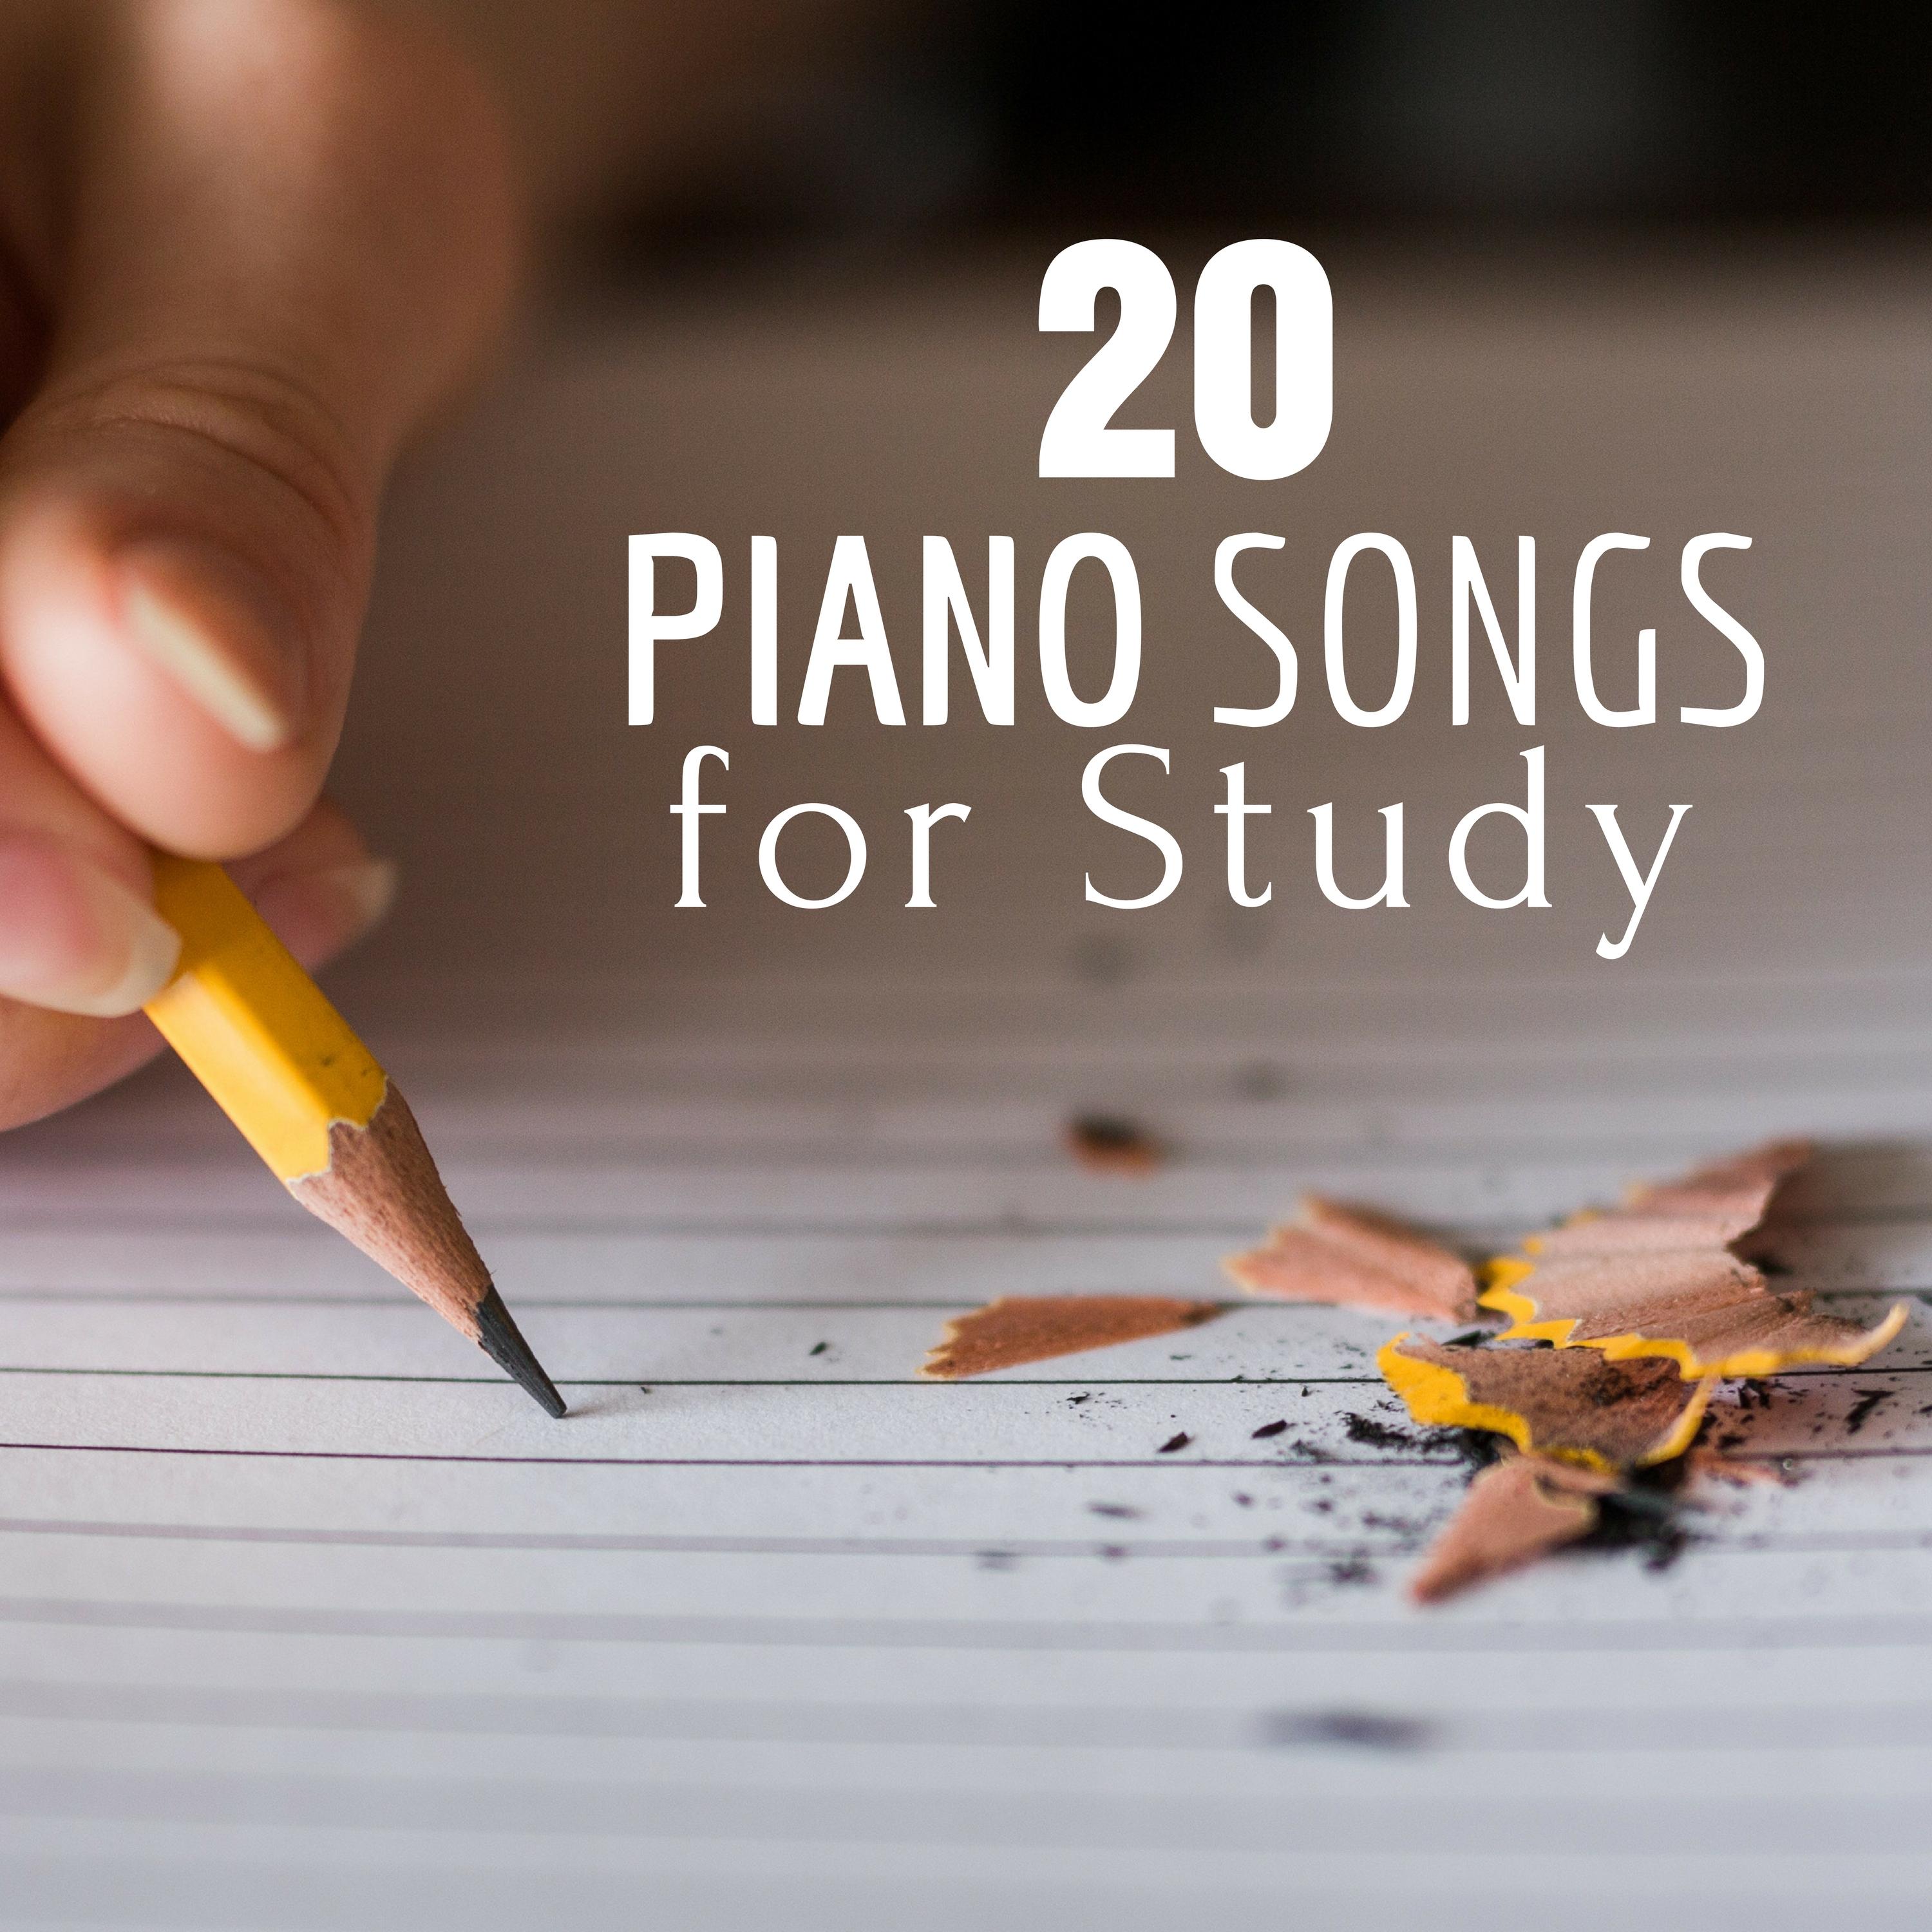 20 Piano Songs for Study - Best Piano Music for Learning, Brain Development, Meditation Relaxation Music to Study to